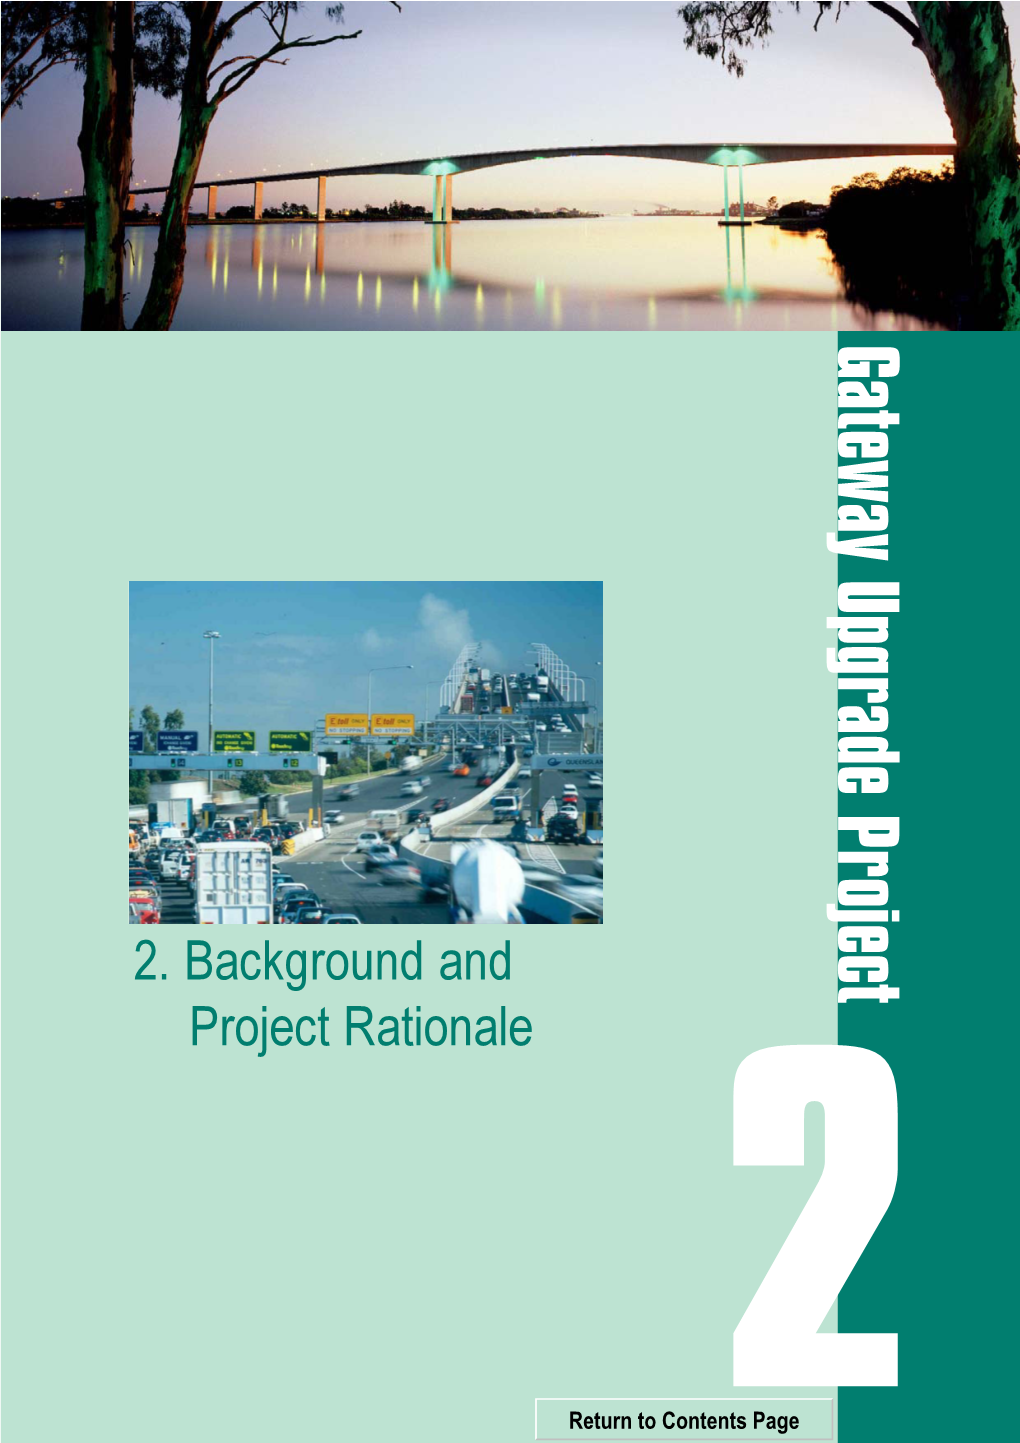 2. Background and Project Rationale